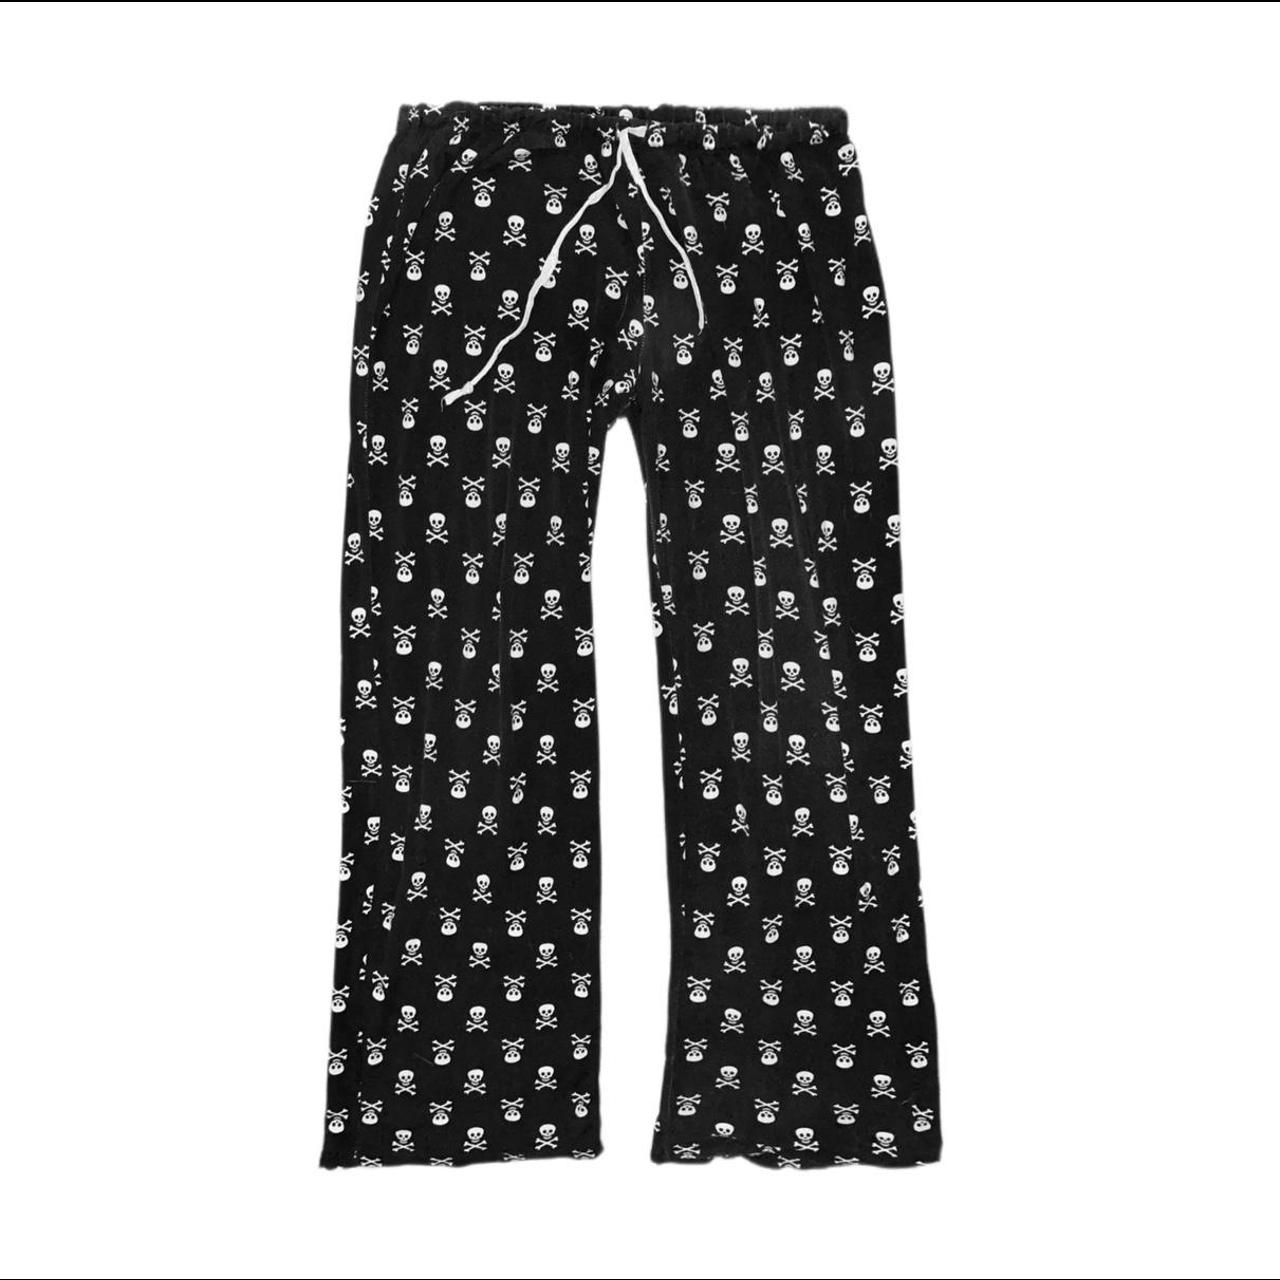 Skull Pajama Pants Early 2000’s! Mall goth / Cyber... - Depop